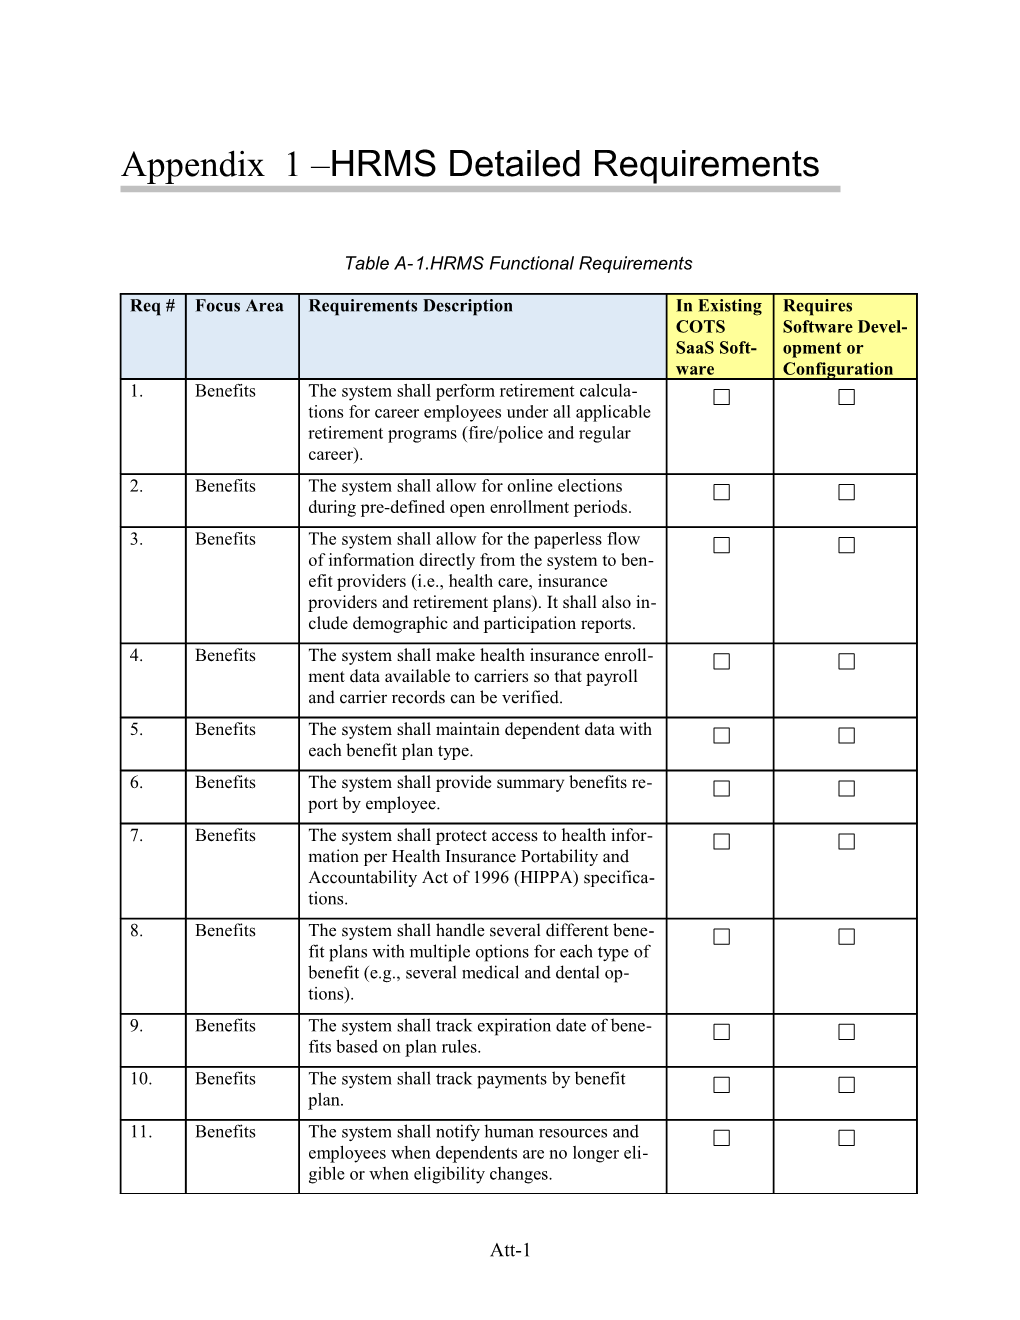 Appendix a HRMS Detailed Requirements